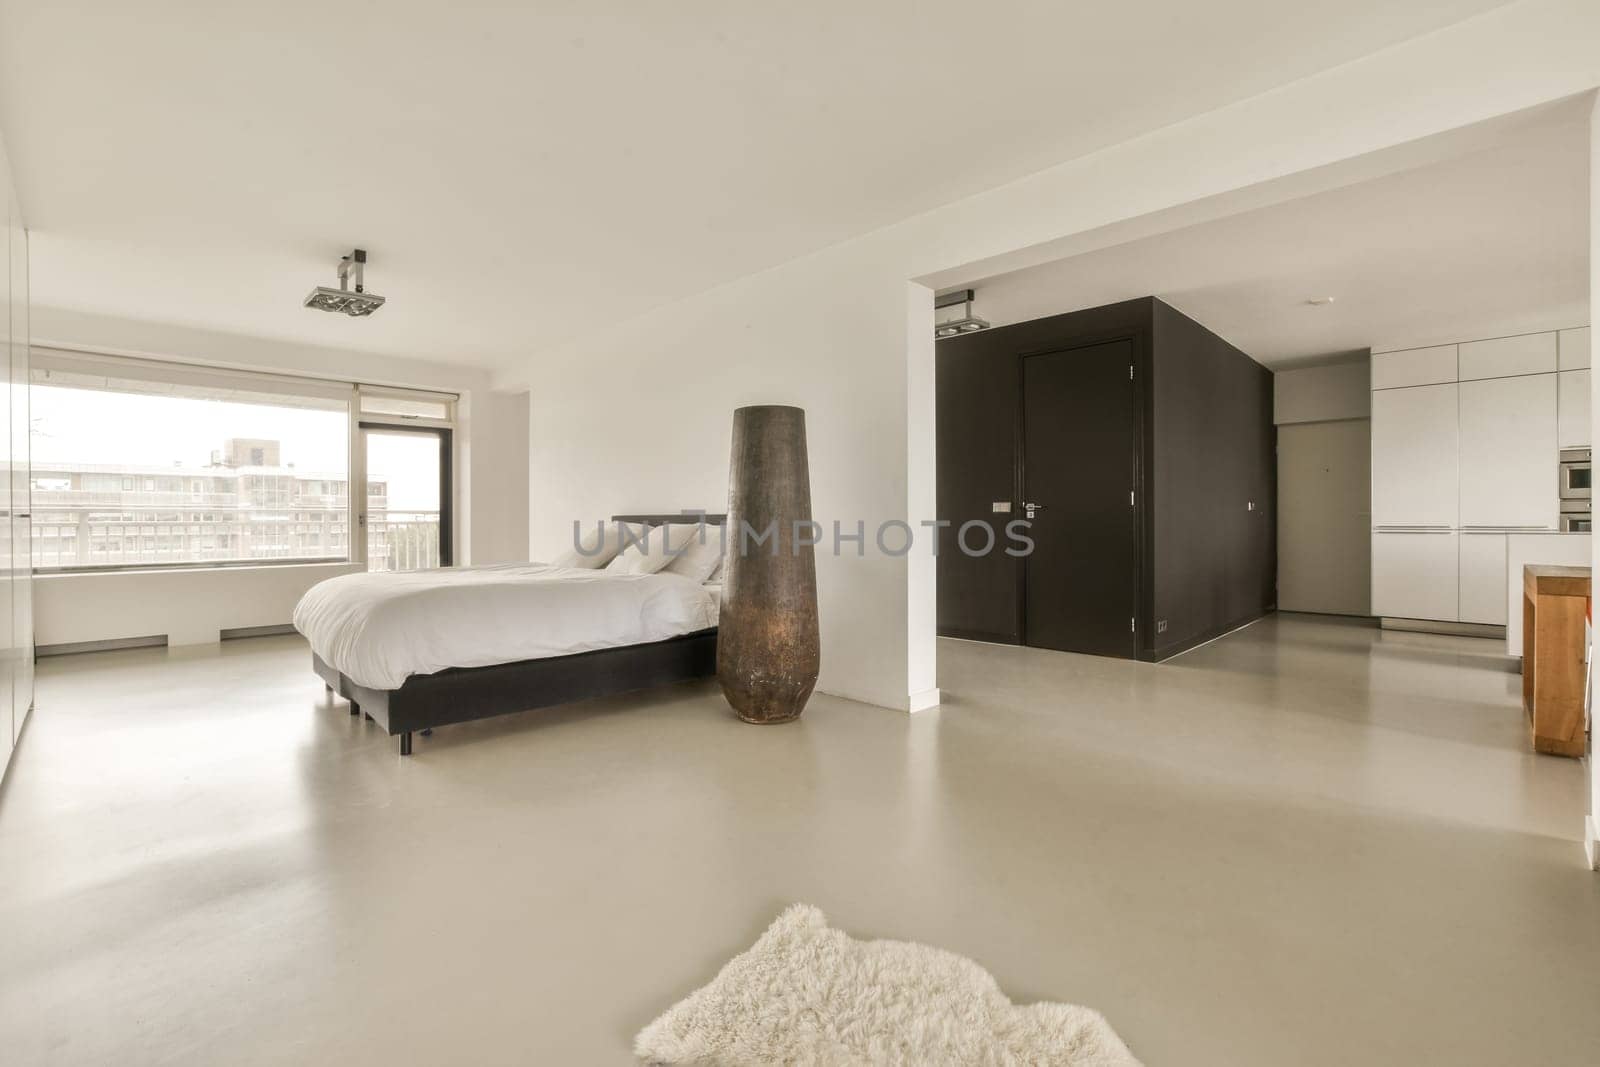 a modern bedroom with white walls and flooring, there is a large bed in the room has an area rug on the floor